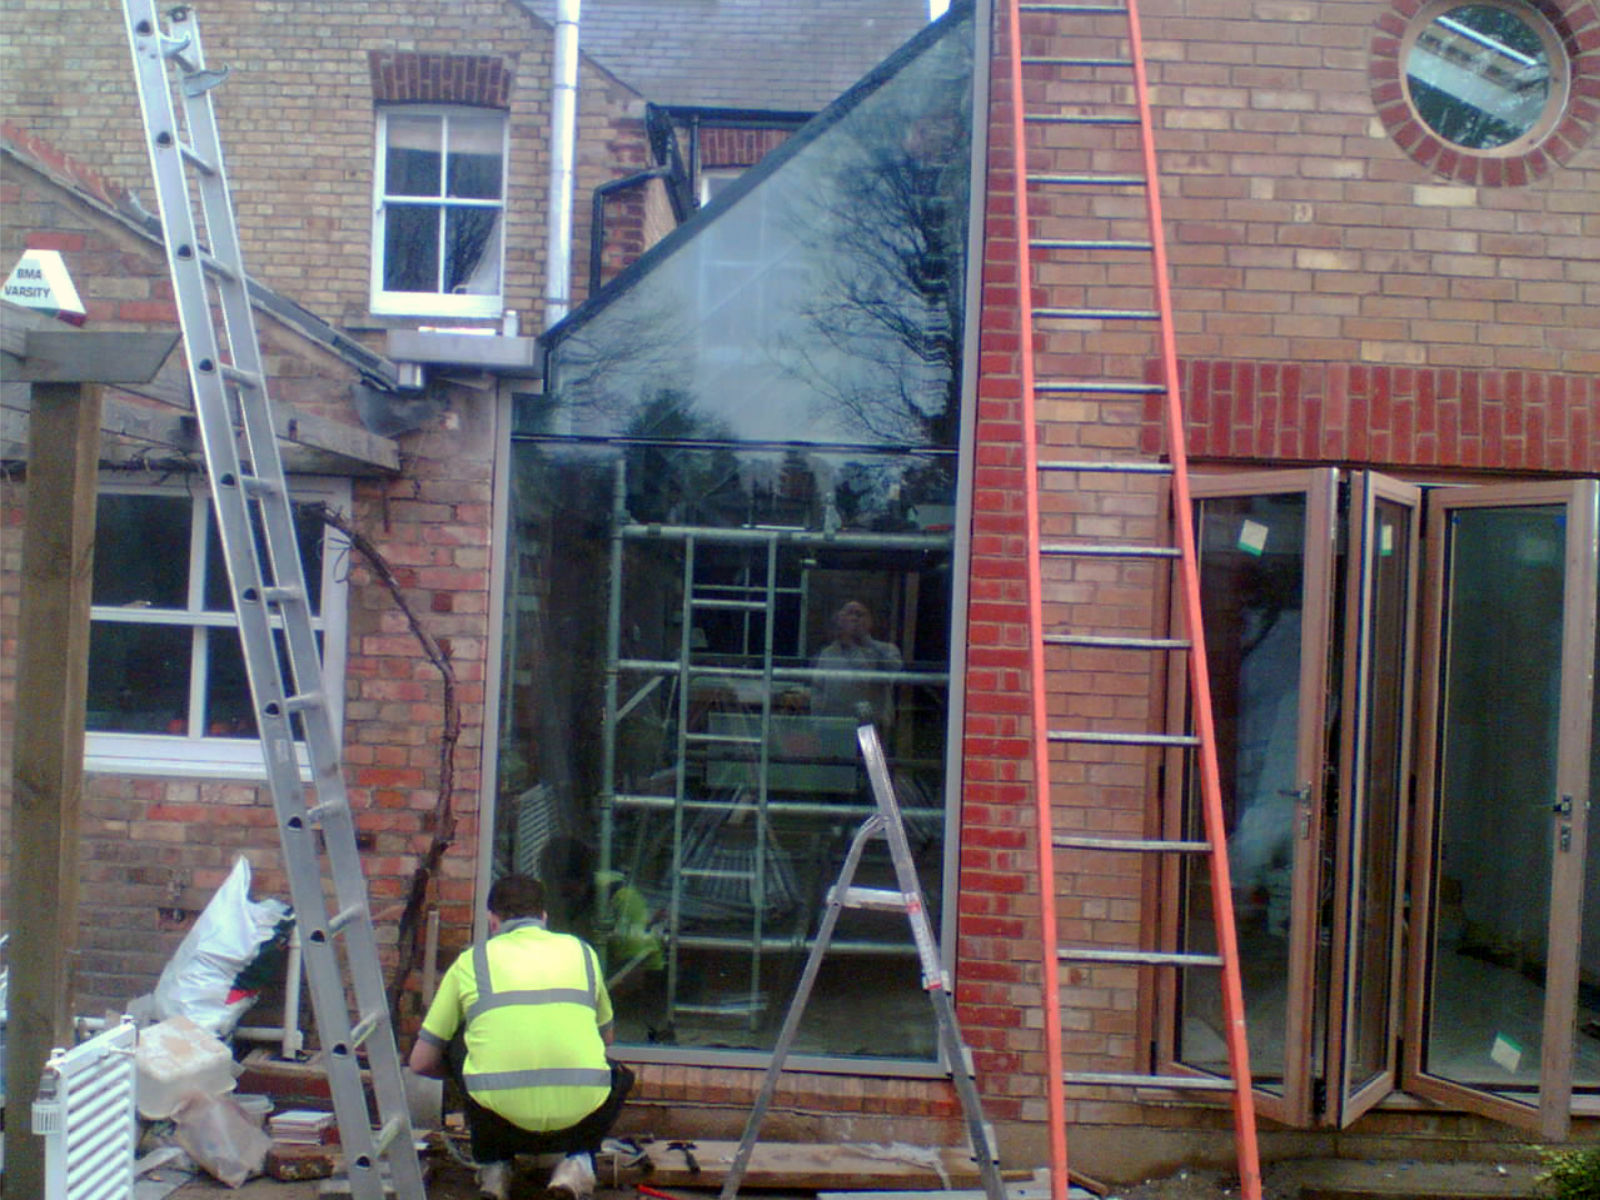 Install residential structural glass.